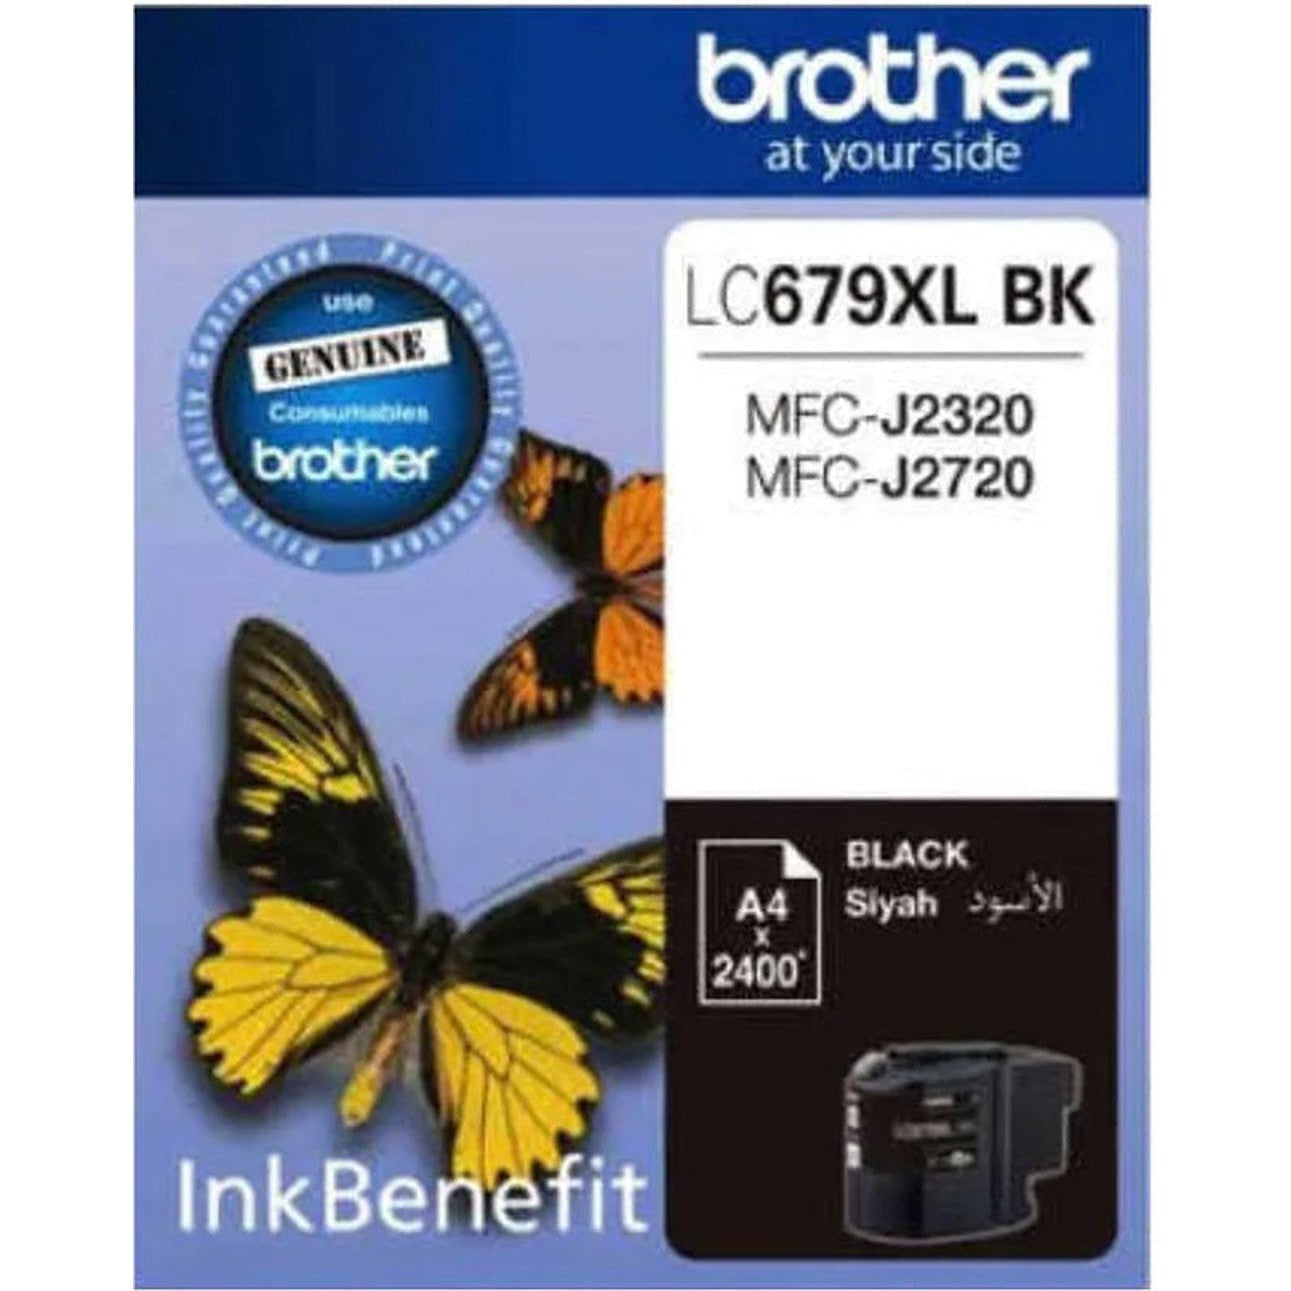 Brother Lc 679 Xl Black Ink Cartridge-Inks And Toners-Brother-Star Light Kuwait